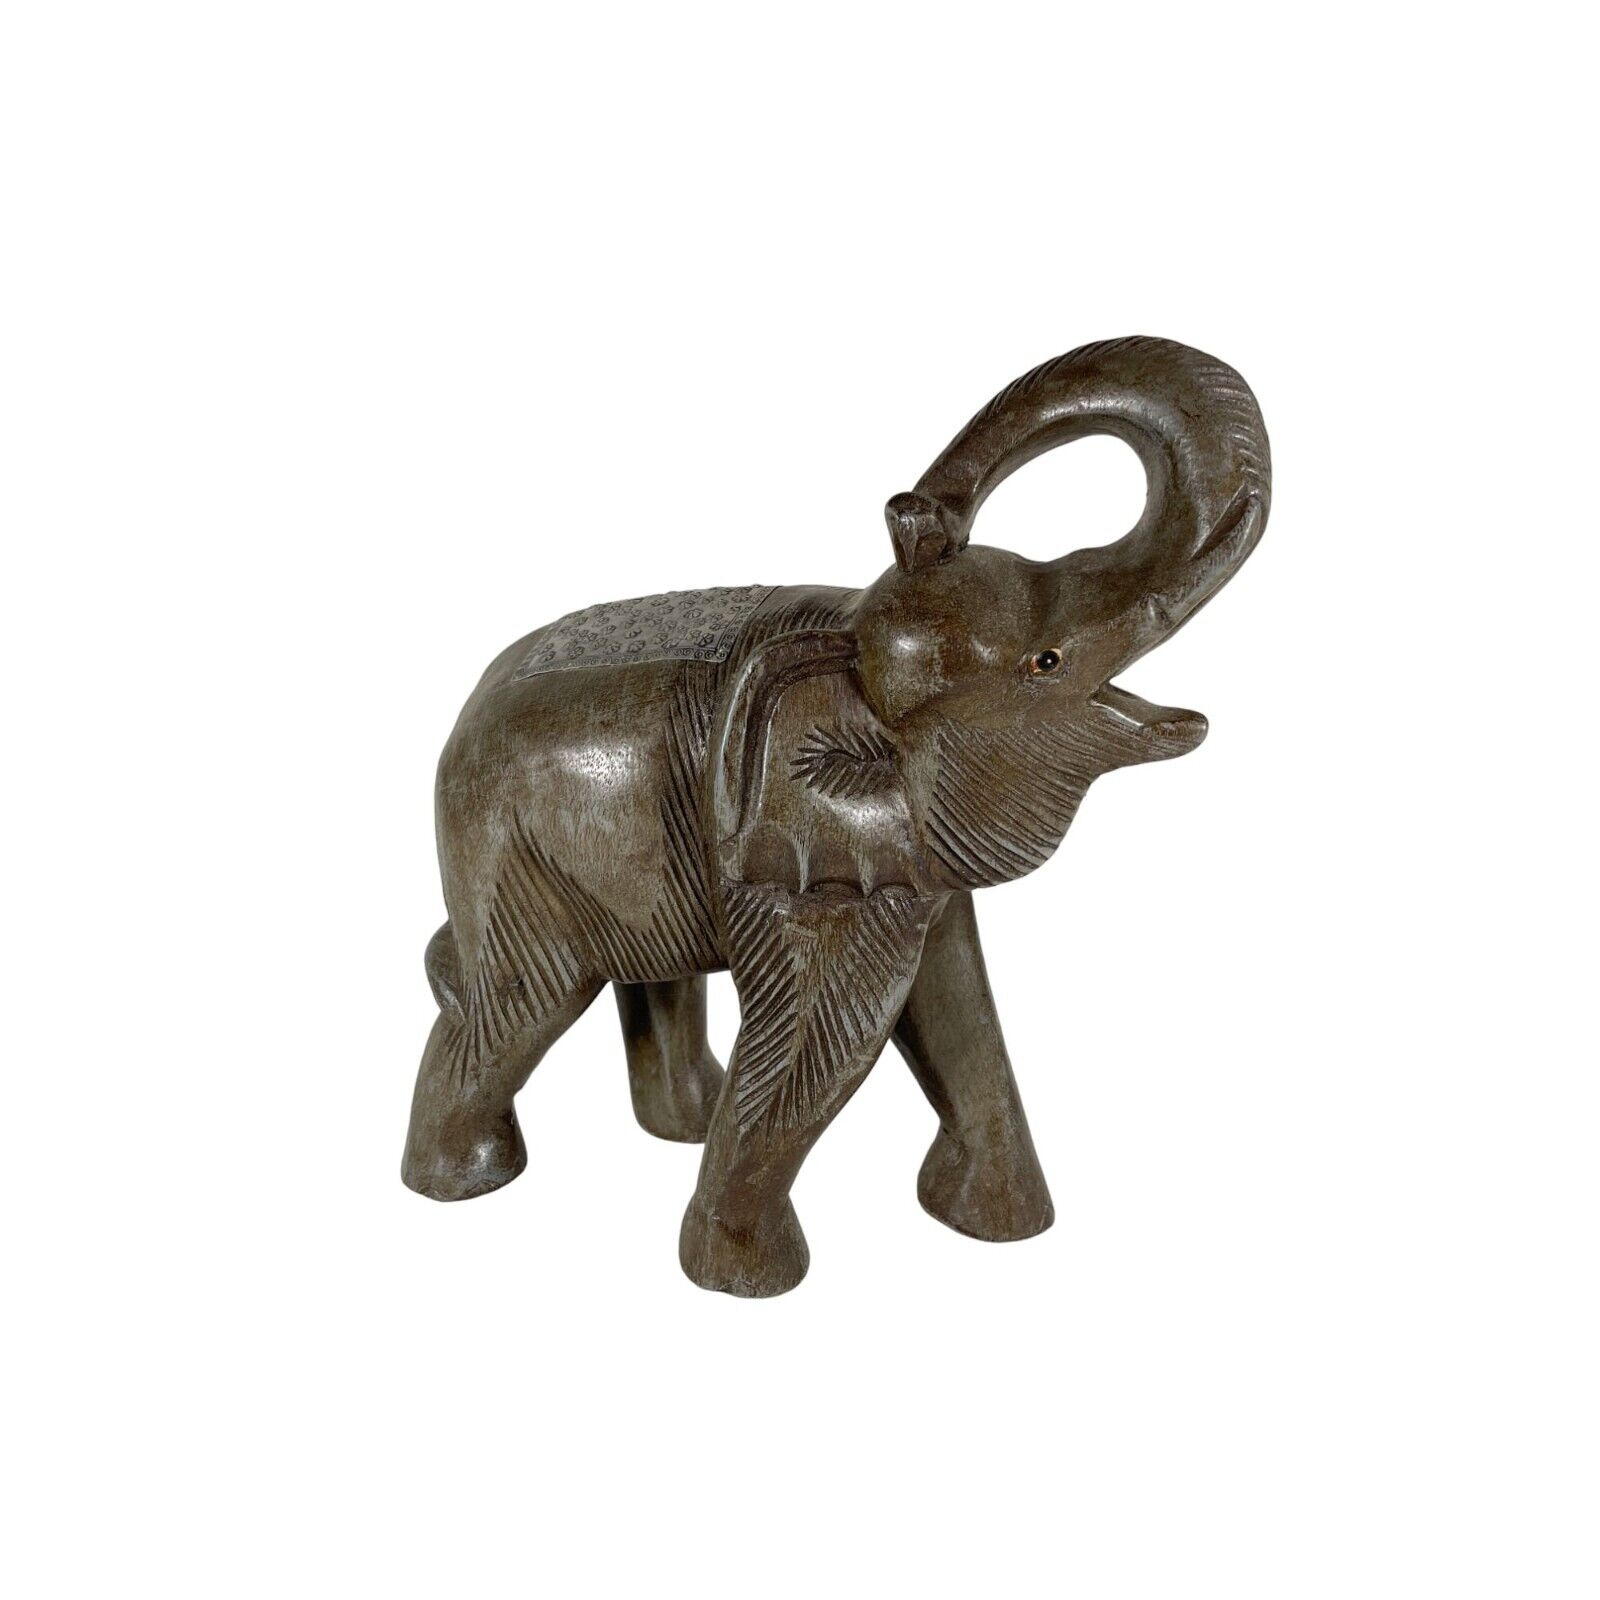 Vintage Large Wooden Elephant Statue Hand Carved Solid Wood Metal Accents